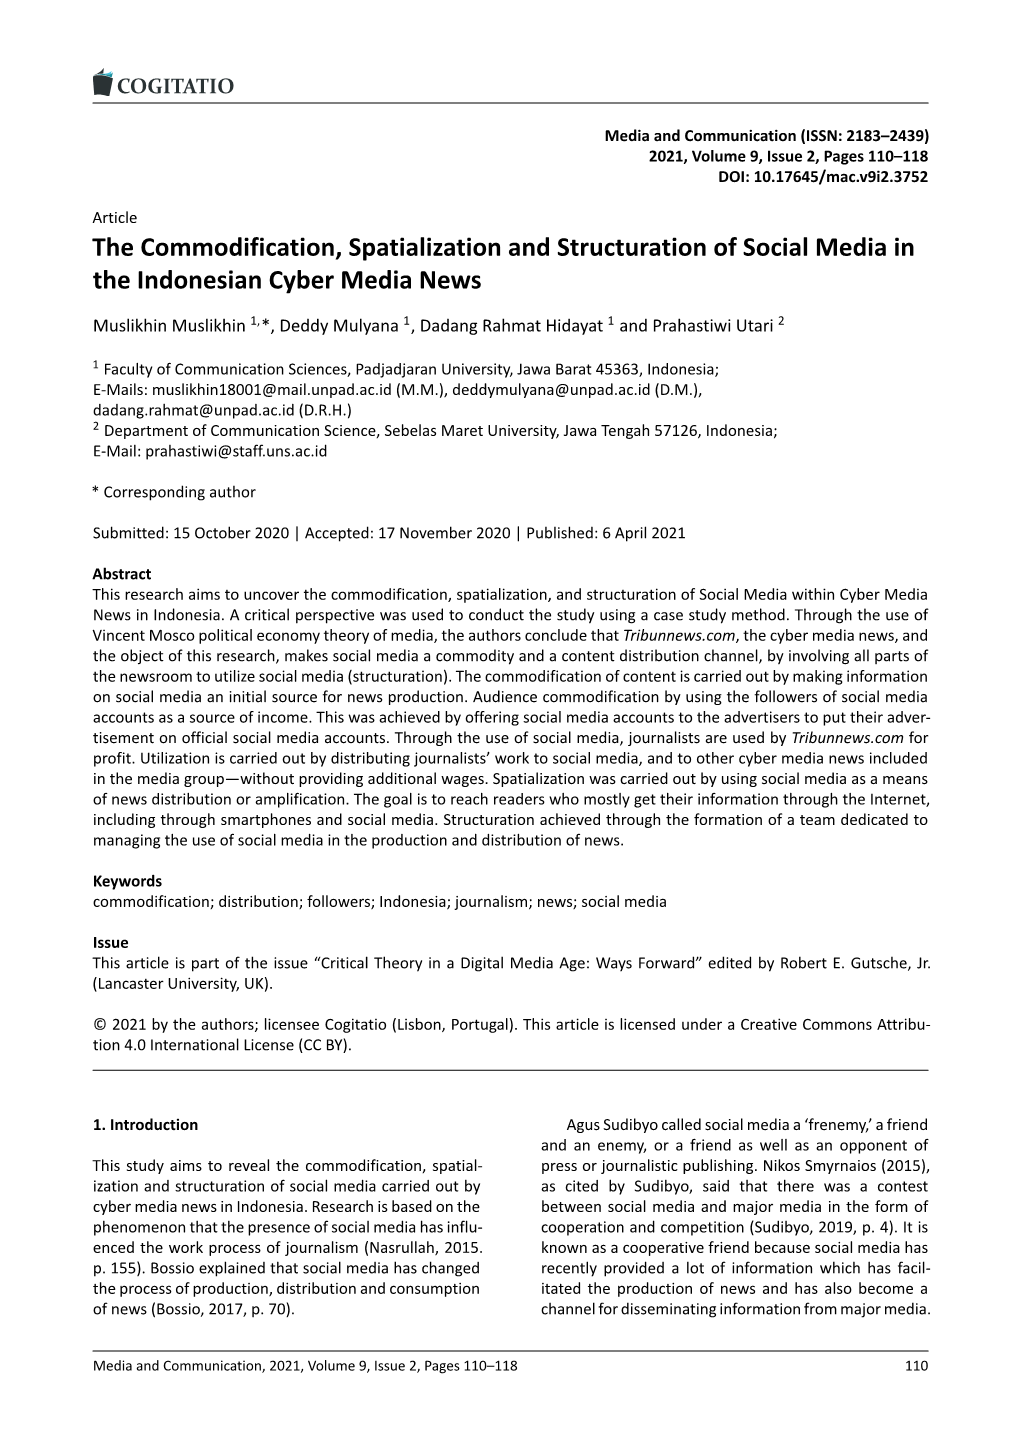 The Commodification, Spatialization and Structuration of Social Media in the Indonesian Cyber Media News